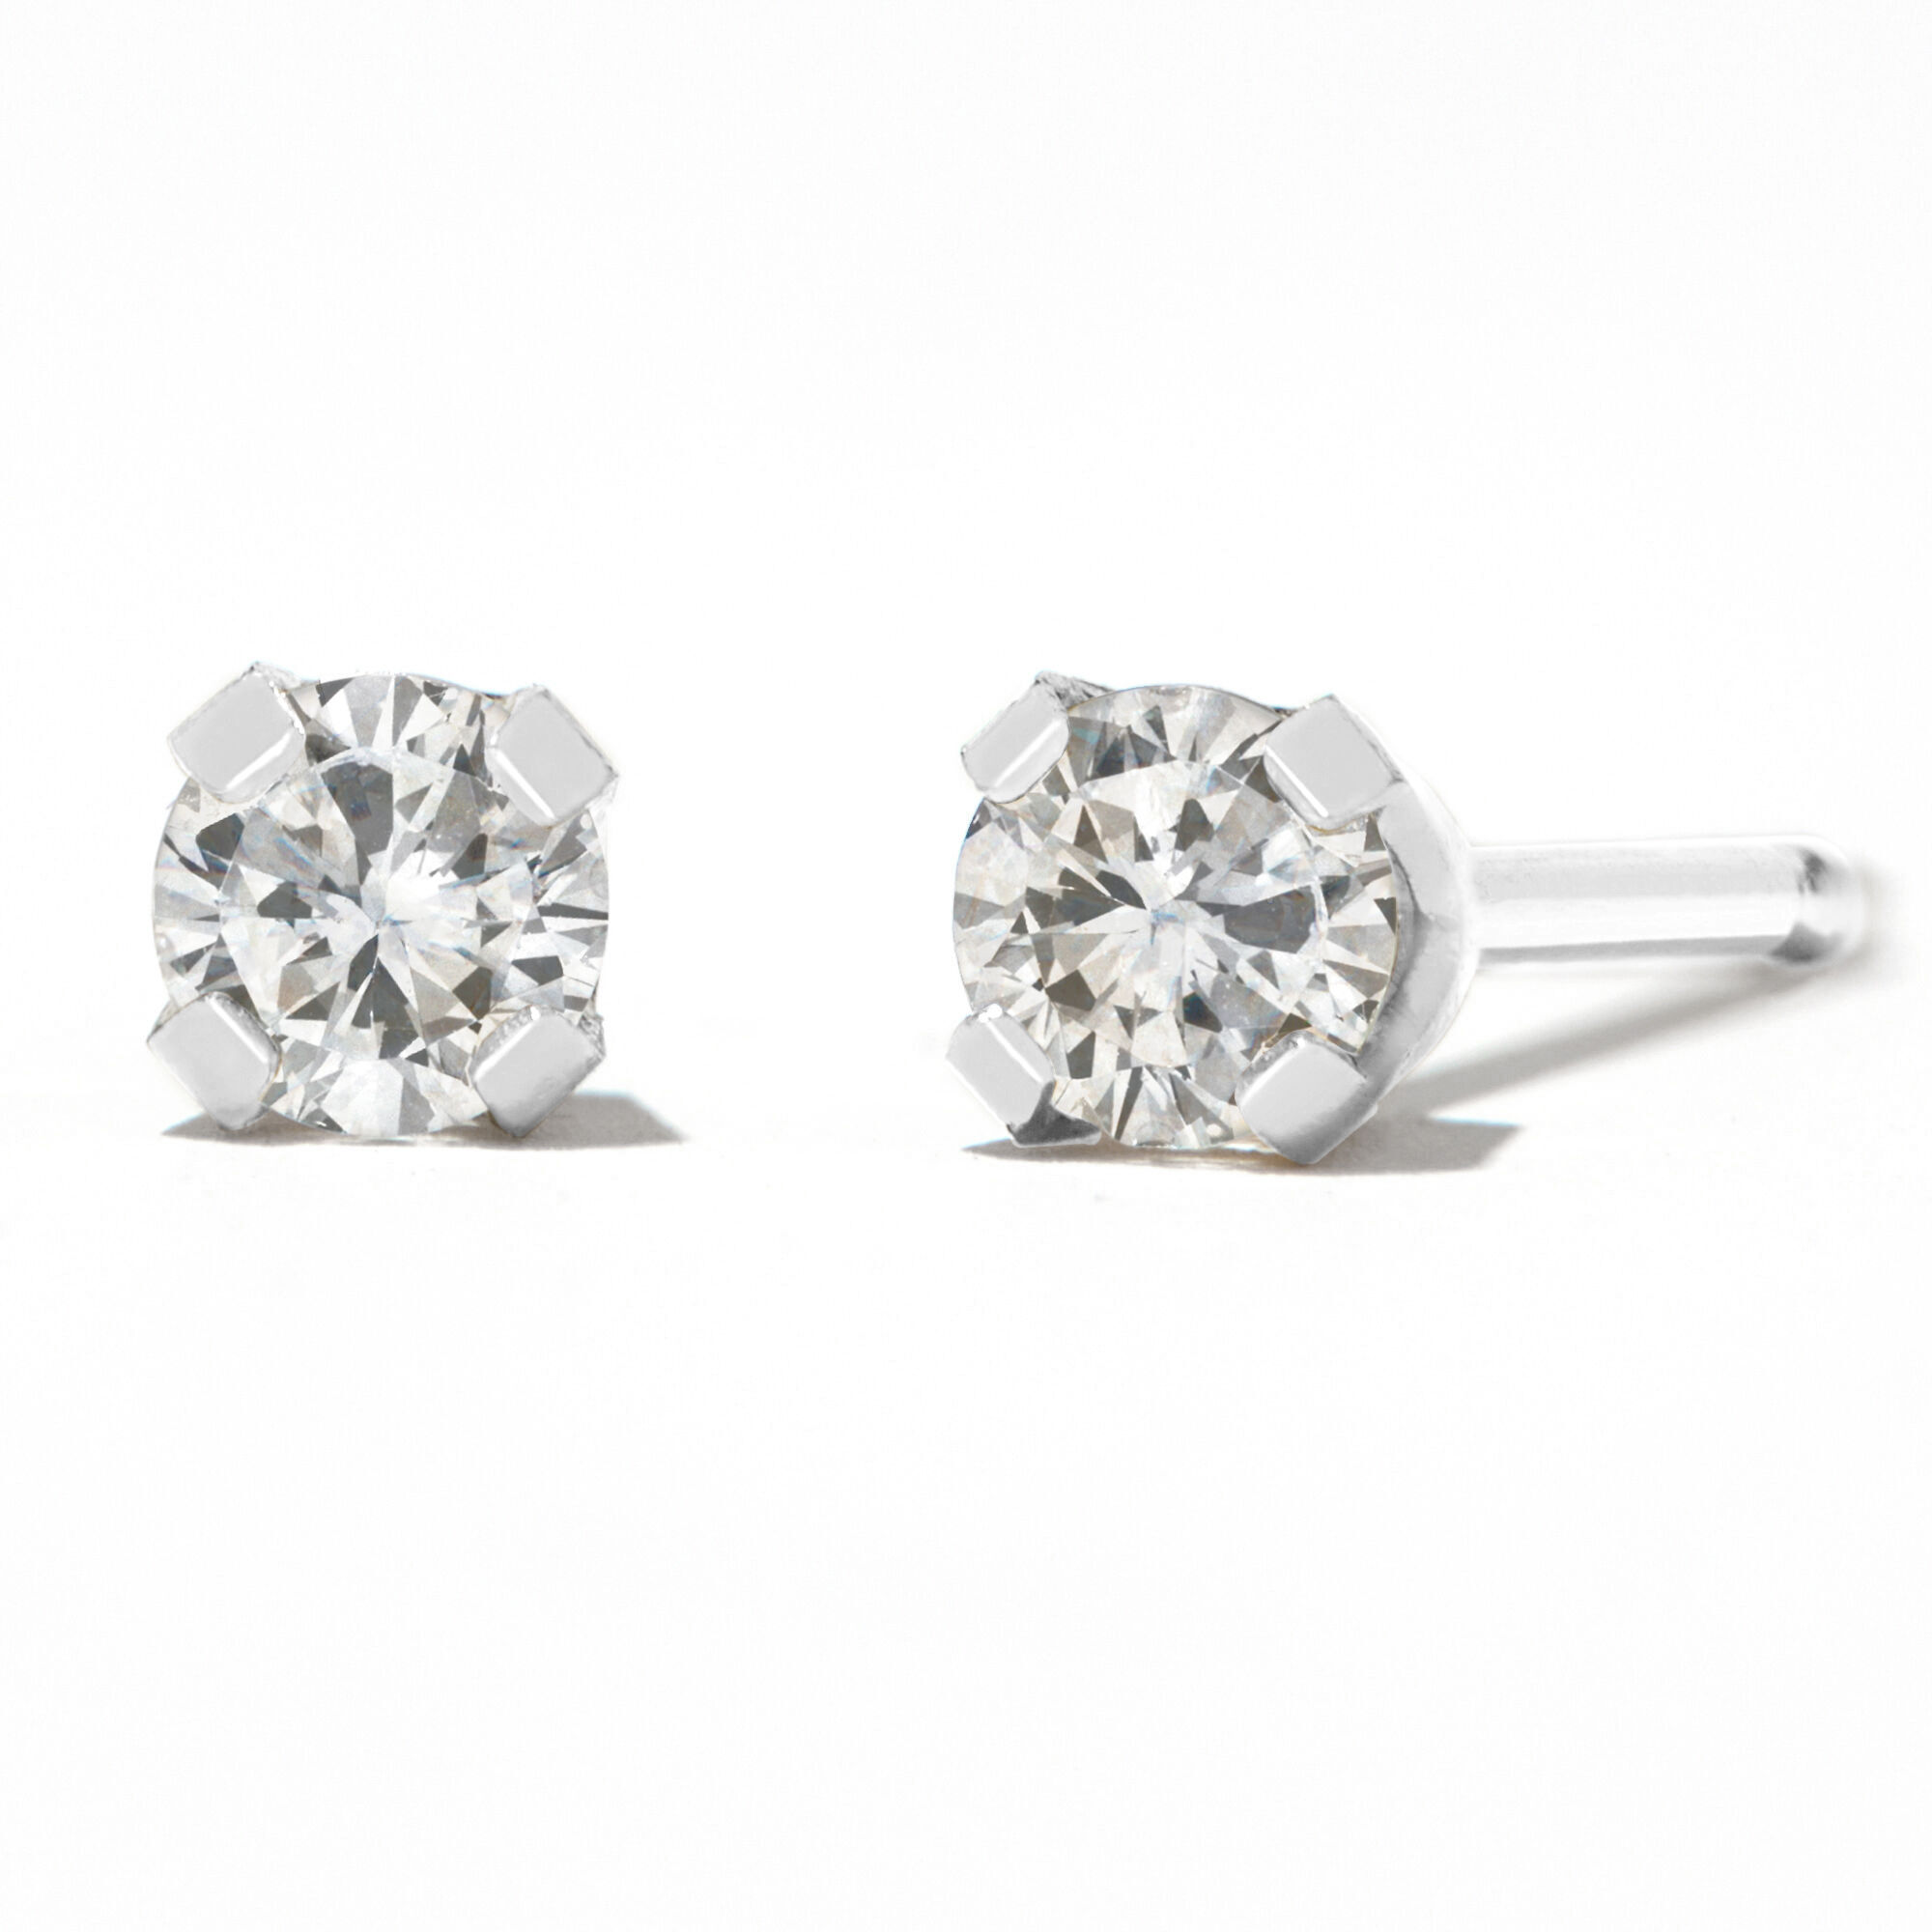 Lab-Created Diamonds by KAY Solitaire Earrings 1/2 ct tw 14K Yellow Gold  (F/SI2) | Kay